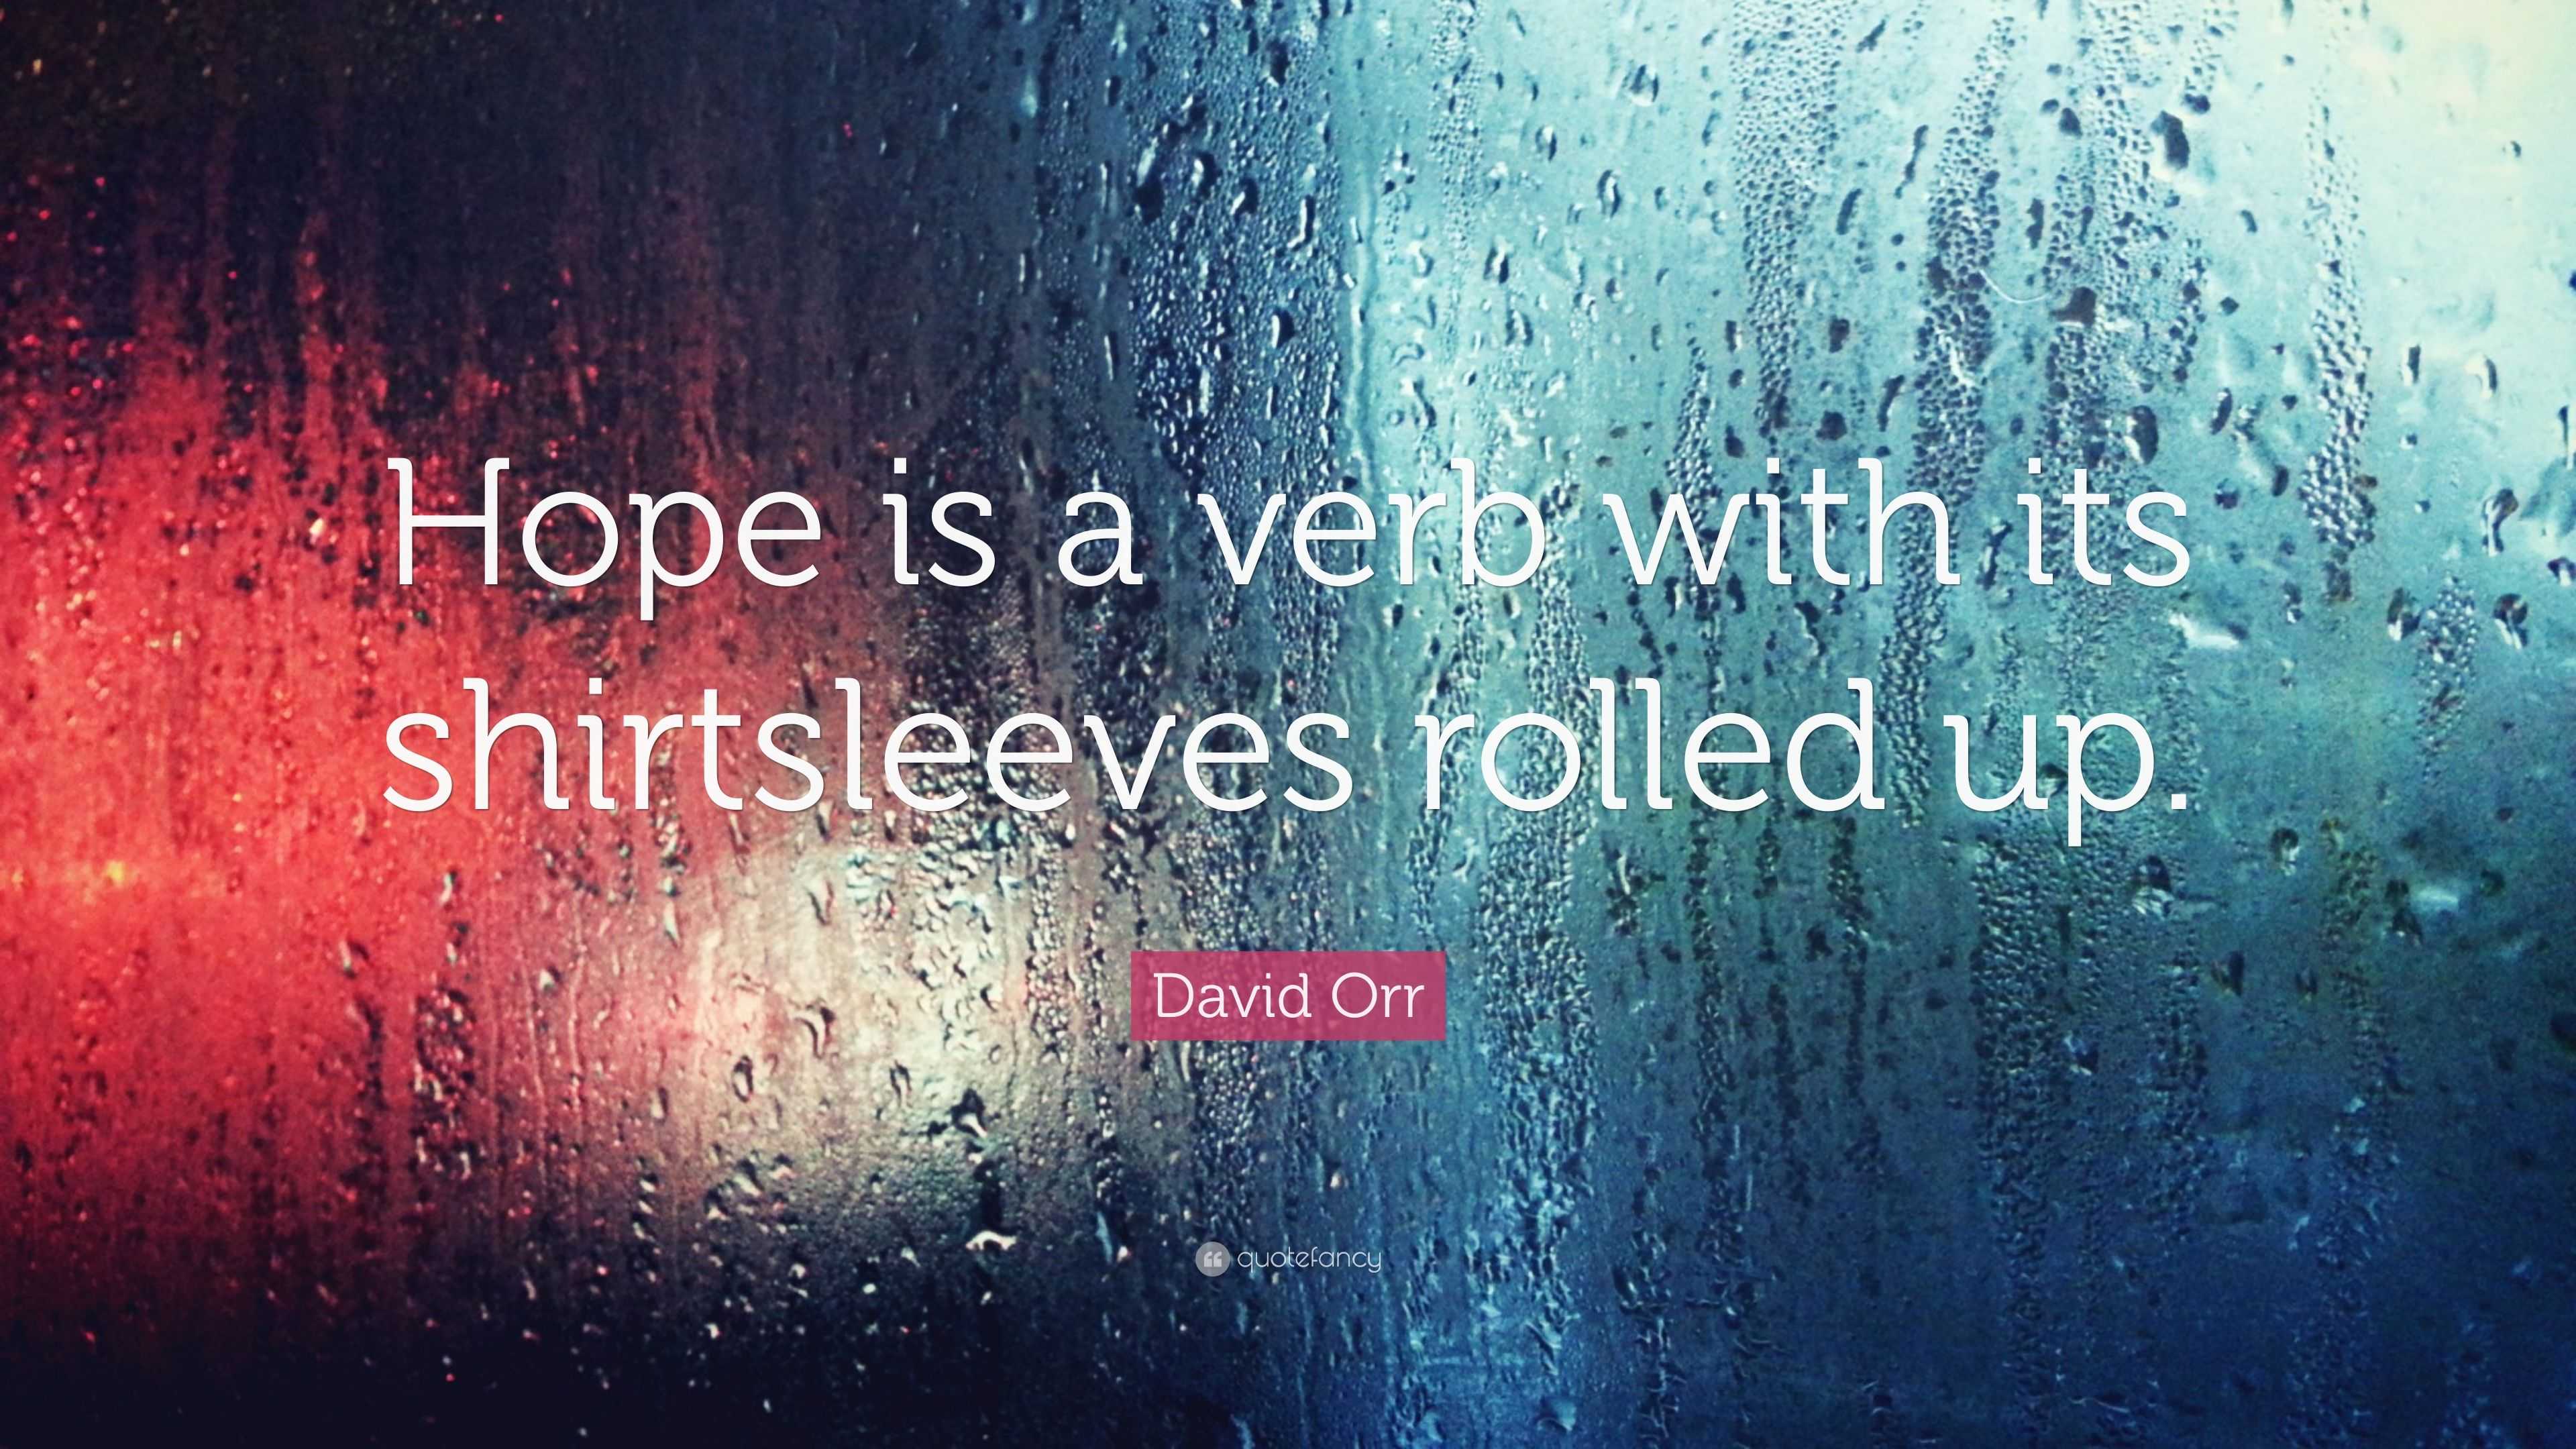 5070955-David-Orr-Quote-Hope-is-a-verb-with-its-shirtsleeves-rolled-up.jpg